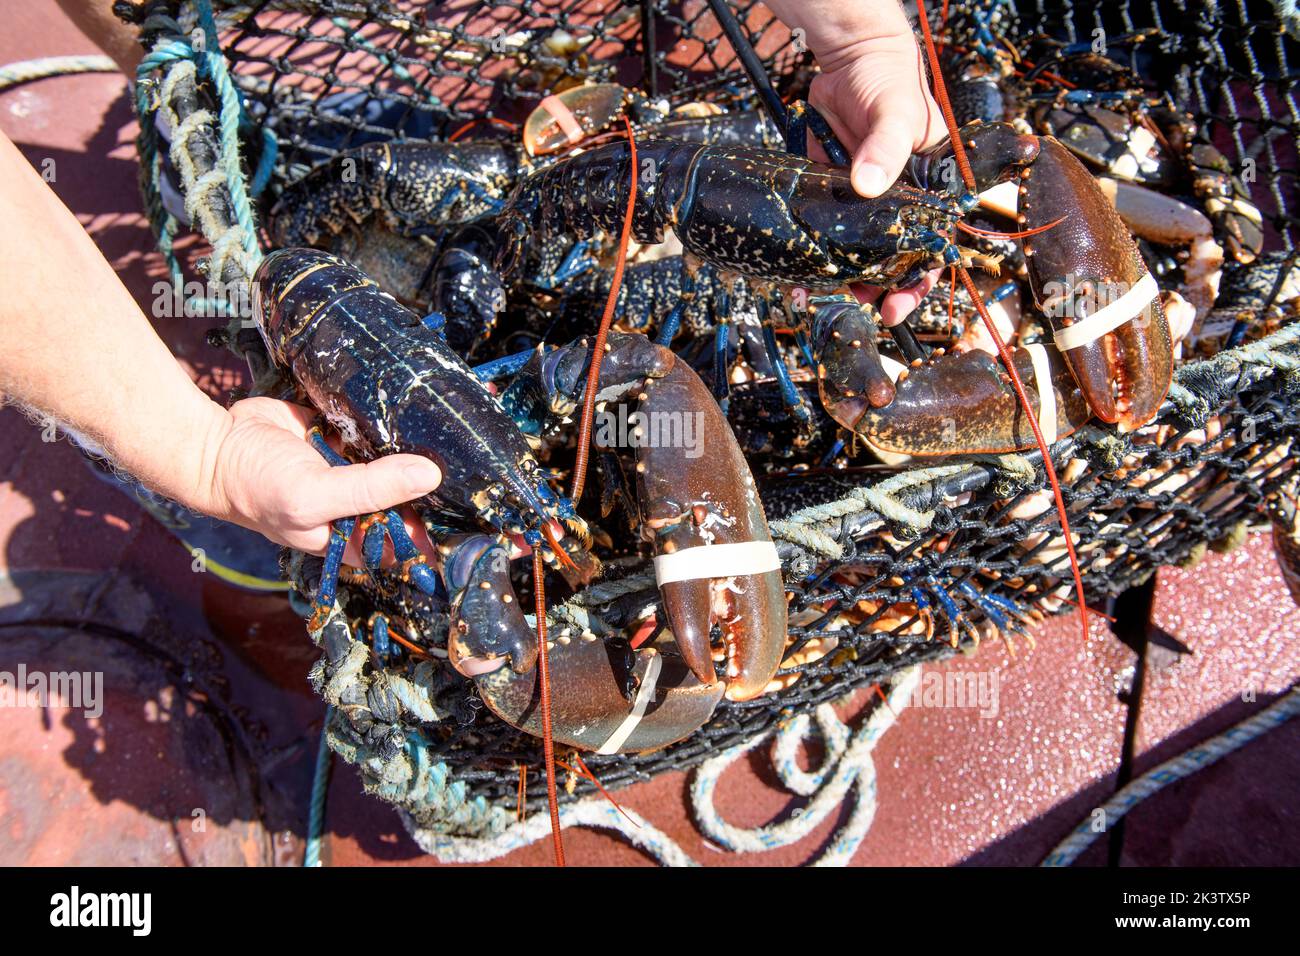 Lobster catch at Newlyn harbour in Cornwall, UK Stock Photo